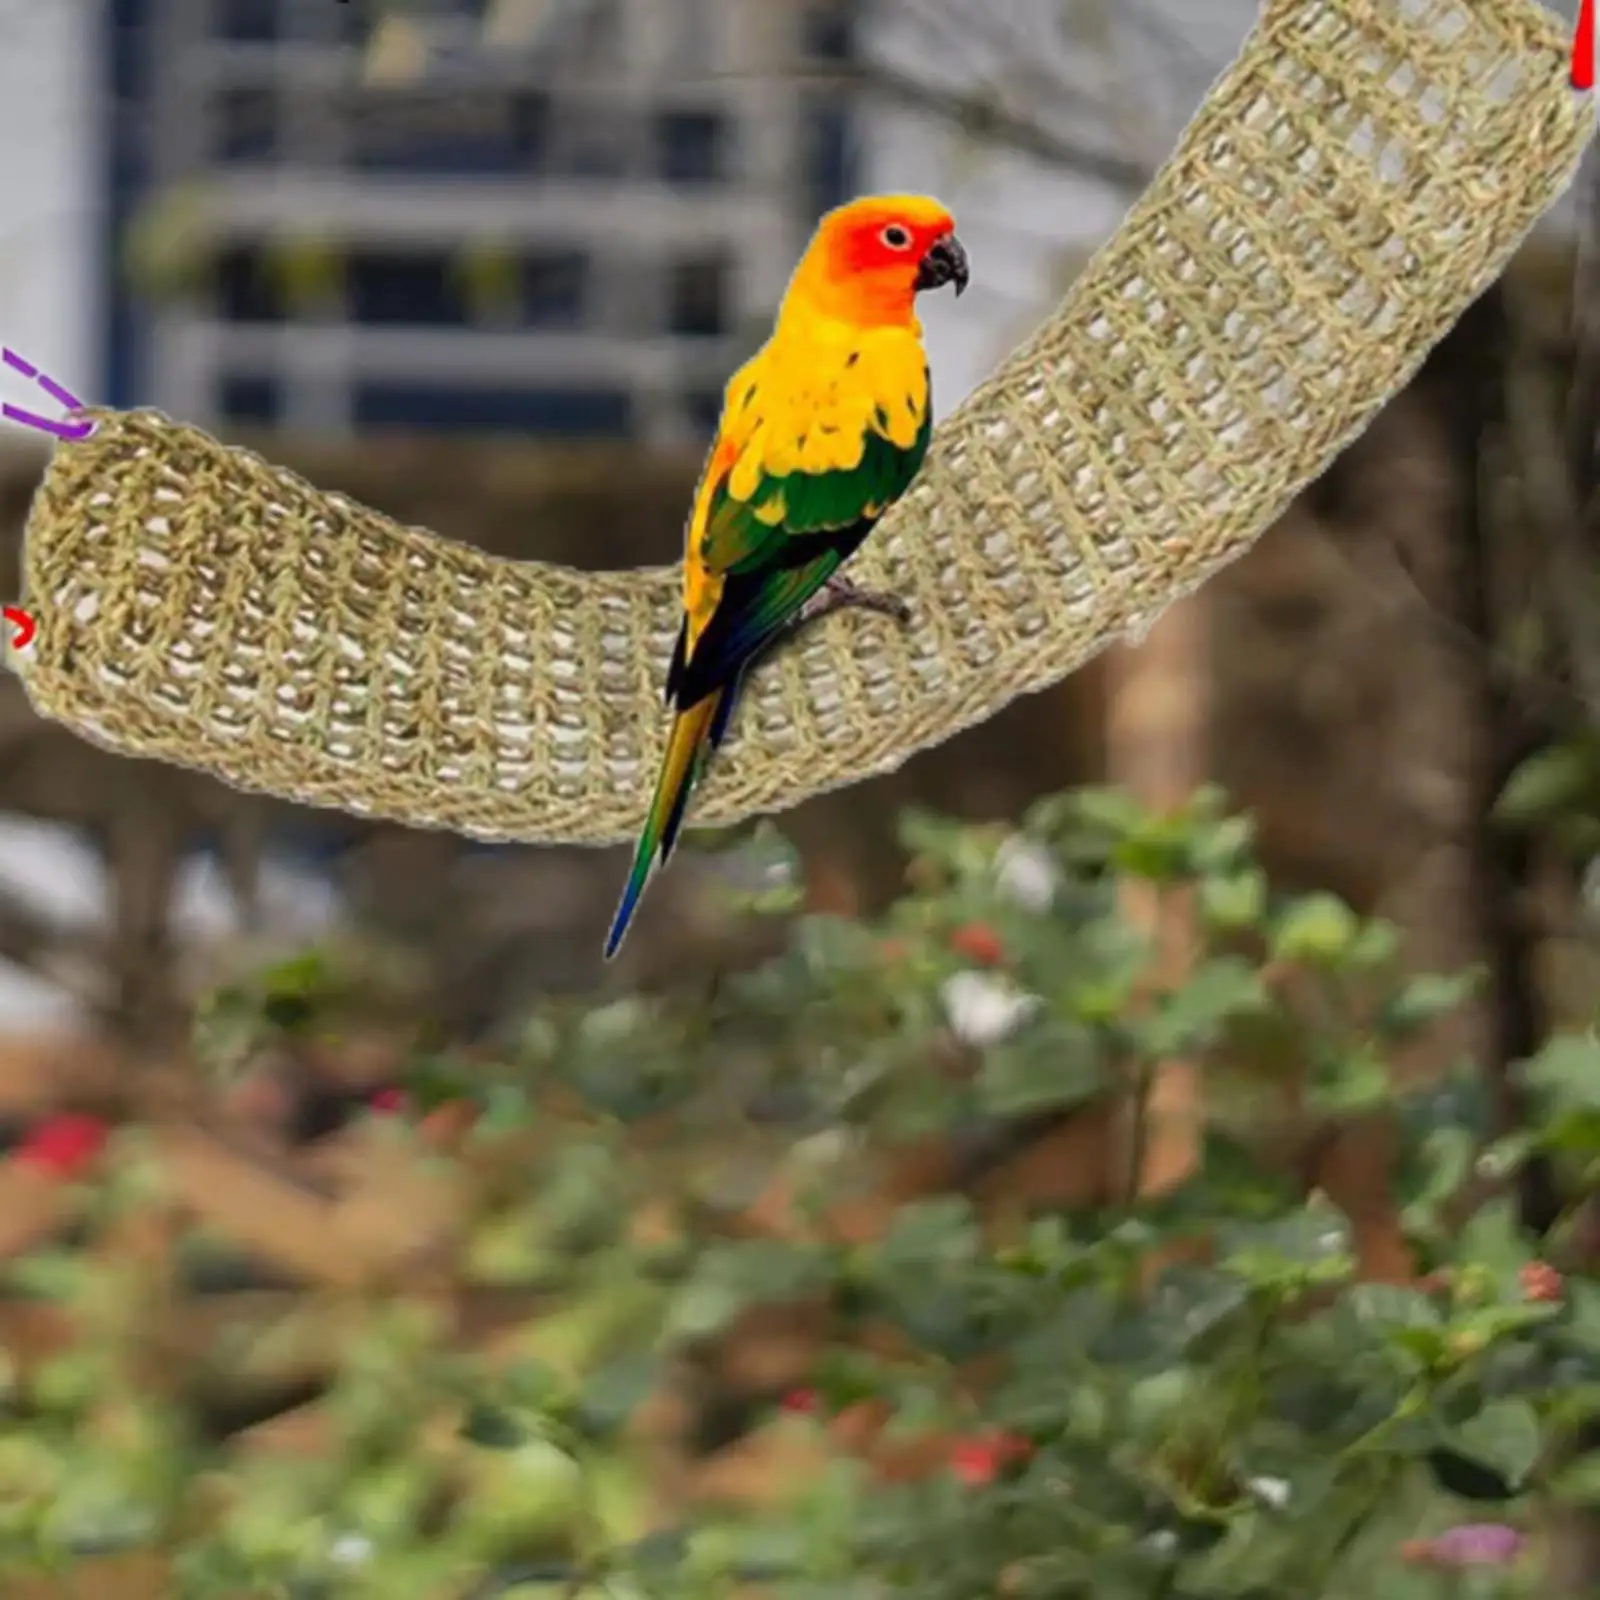 Parrots Stand Climbing Net Hanging Accessory Hammock for Birds Macaws